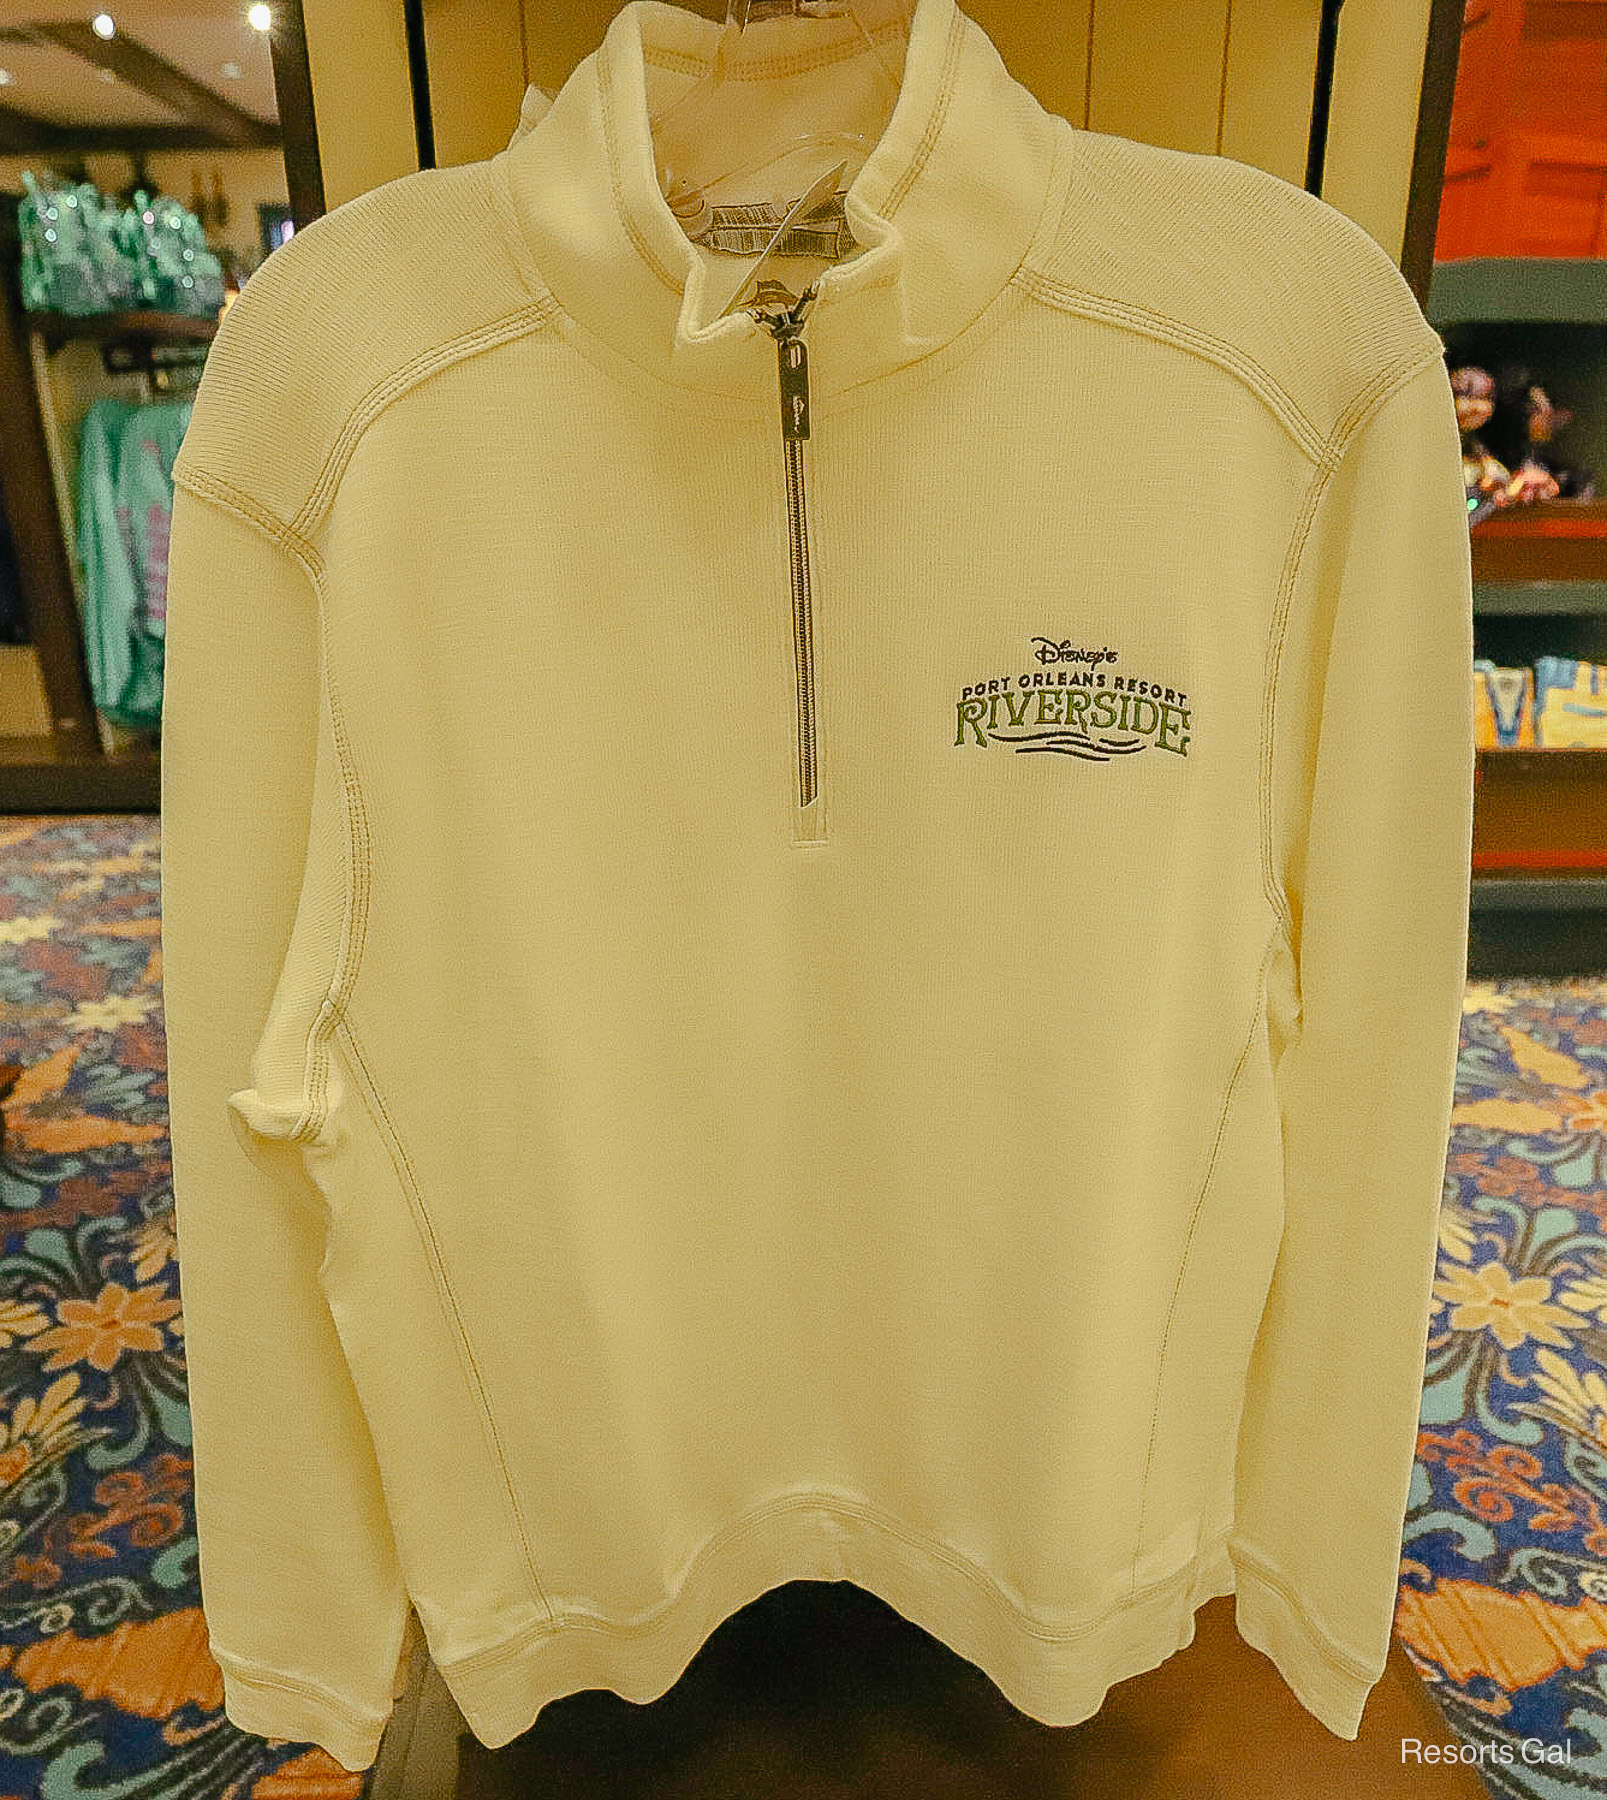 a pullover sweater with the Port Orleans Riverside logo 